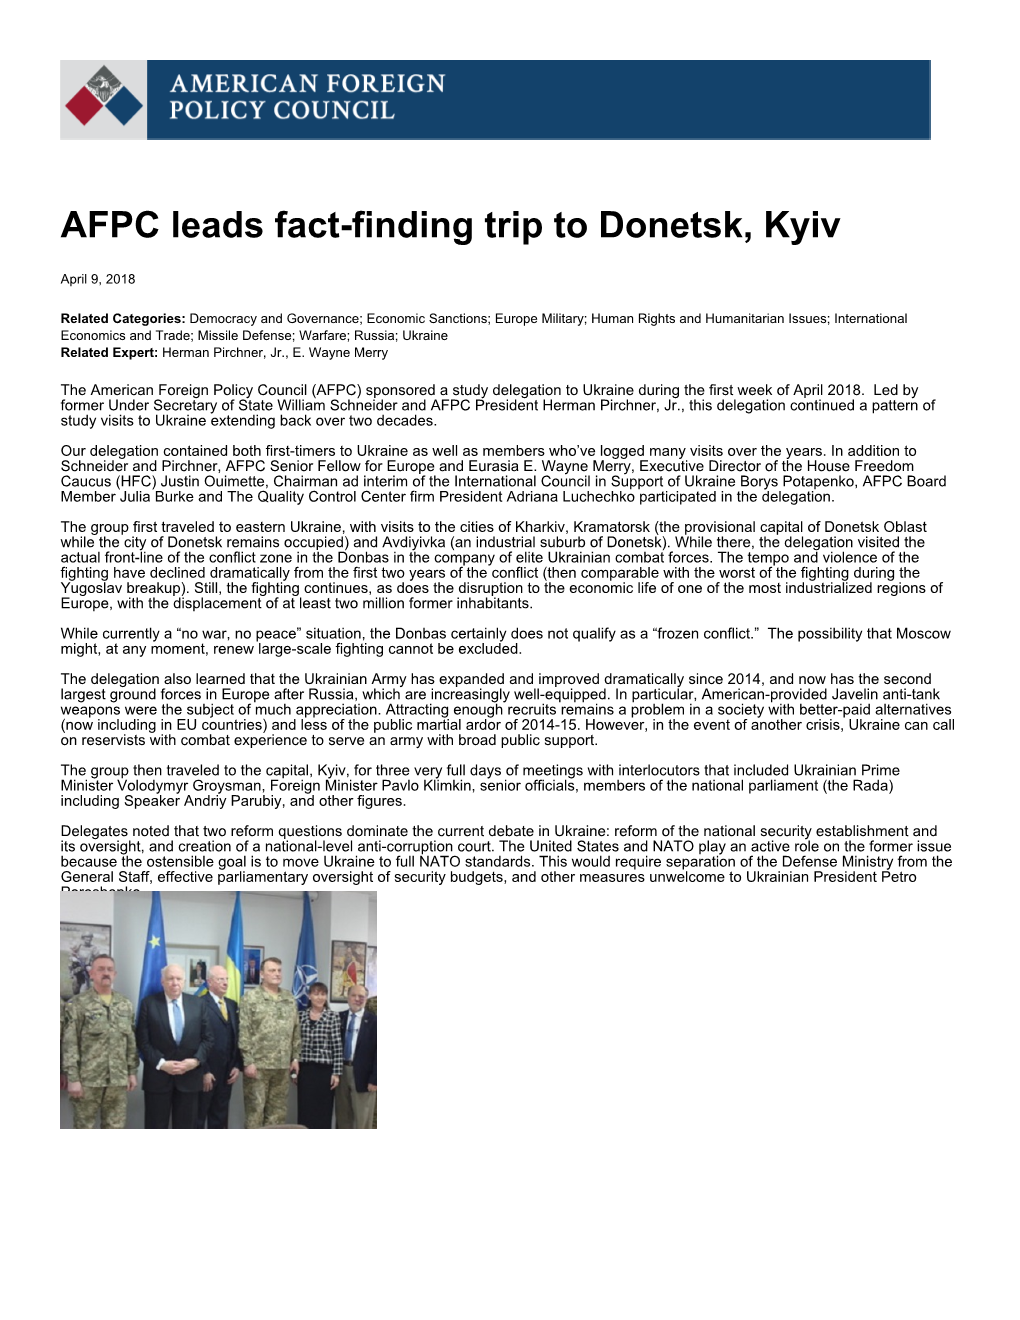 AFPC Leads Fact-Finding Trip to Donetsk, Kyiv | American Foreign